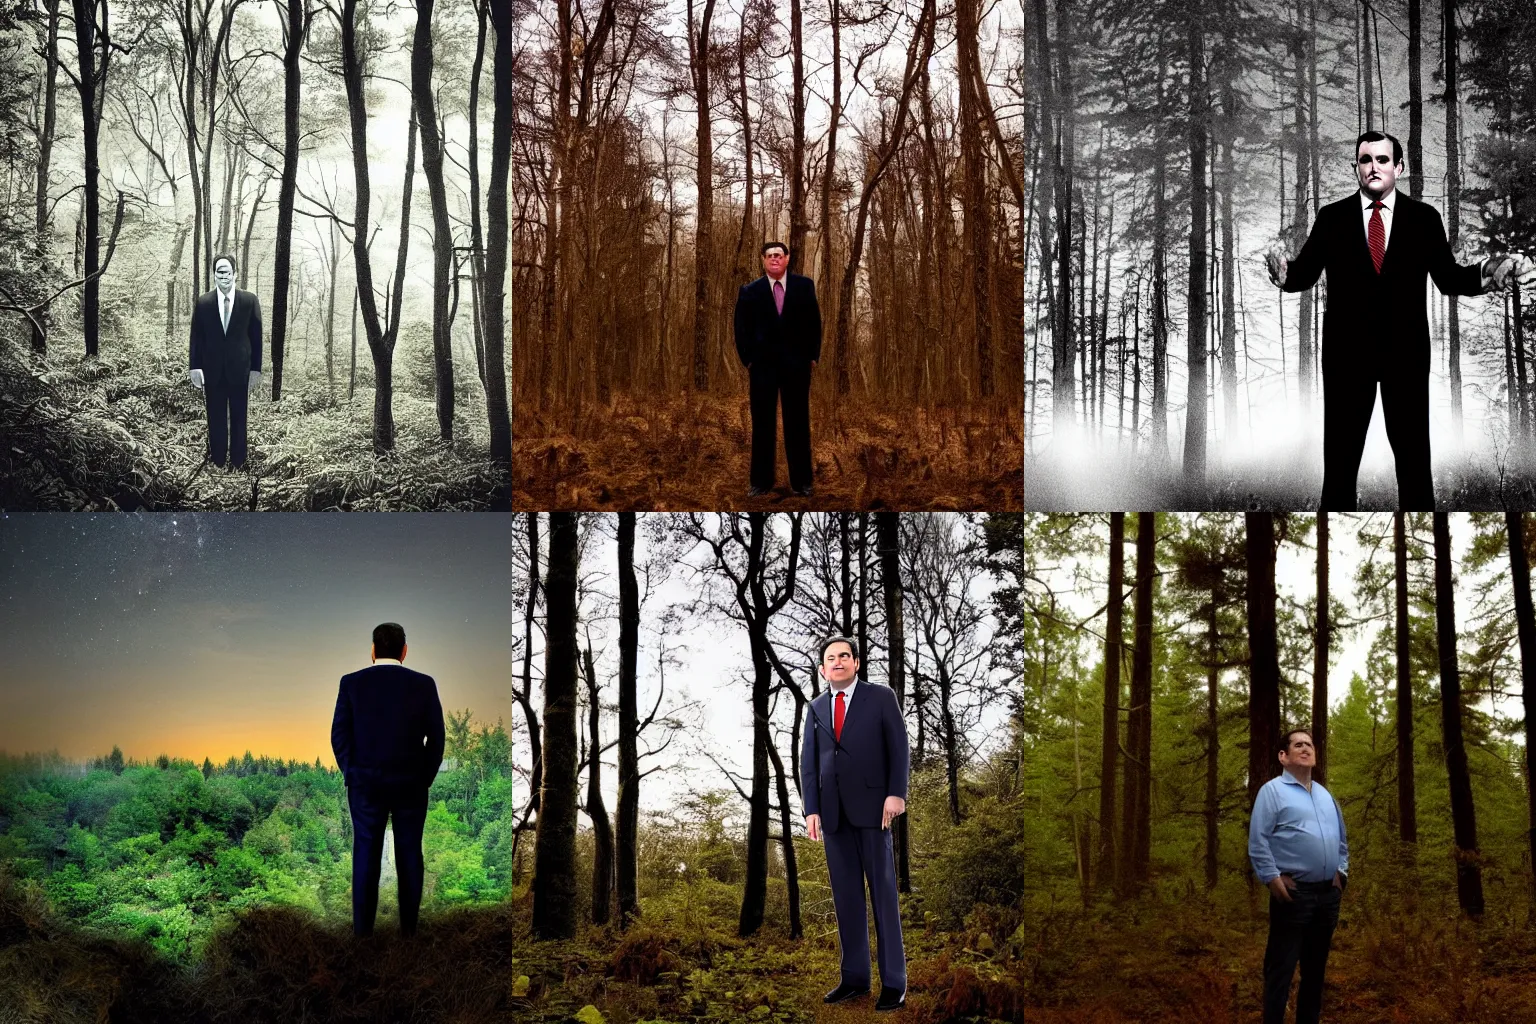 Prompt: ted cruz standing alone in the distance in a dense forest landscape over a twilight sky, creepy, lovecraftian